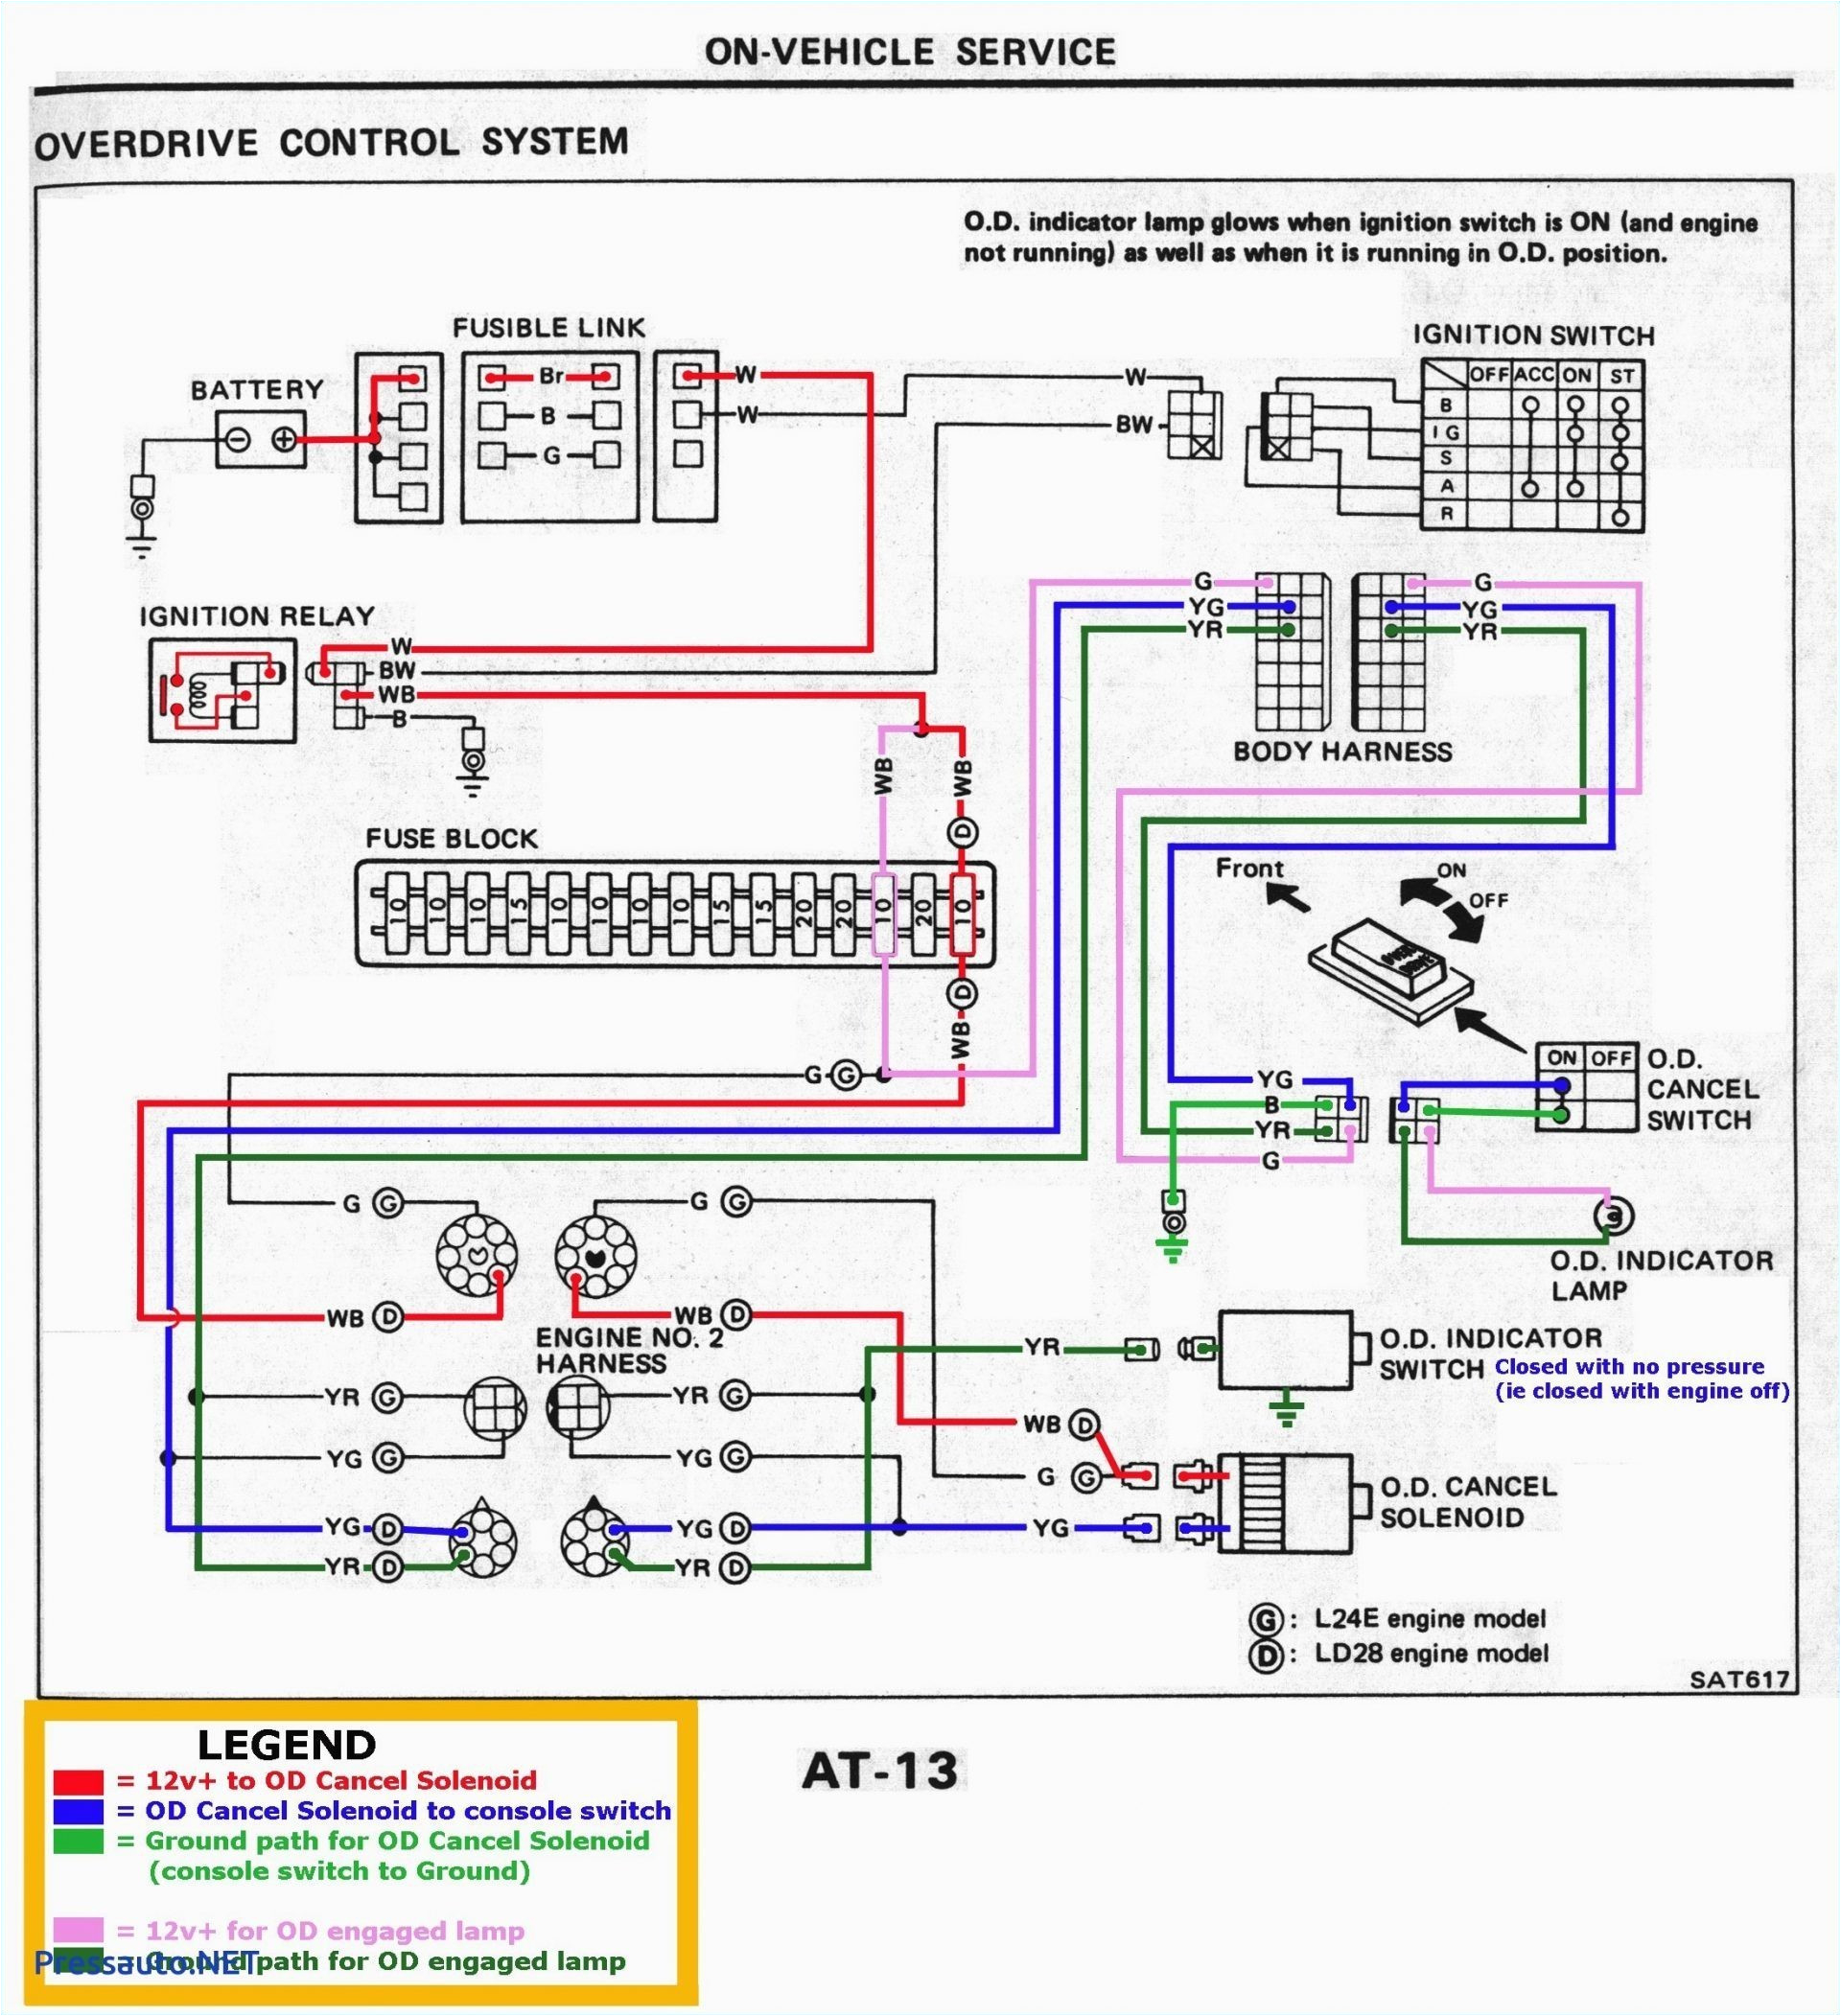 fuse box wires sr14 new wiring diagram mix diions wiring diagram wiring diagram perfomance fuse box